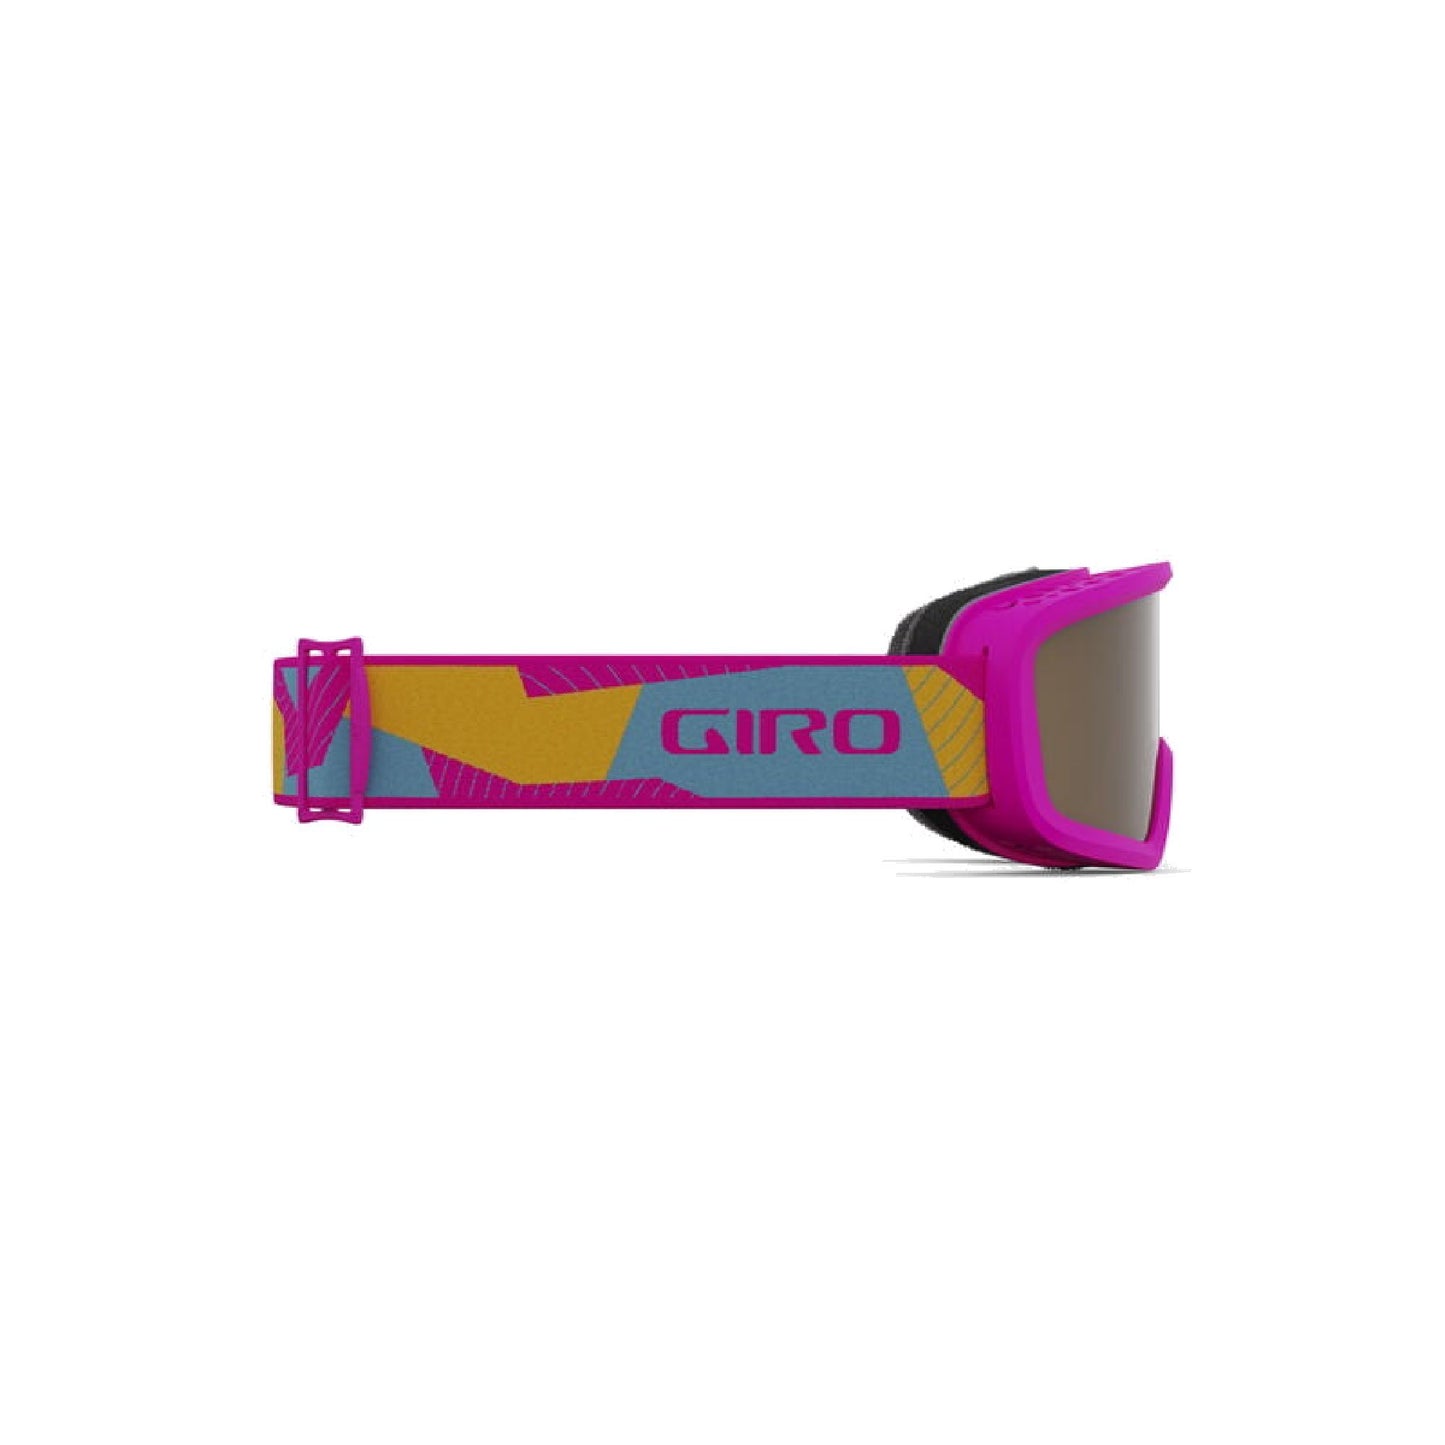 Giro Youth Chico 2.0 Snow Goggles Pink Geo Camo Amber Rose Snow Goggles